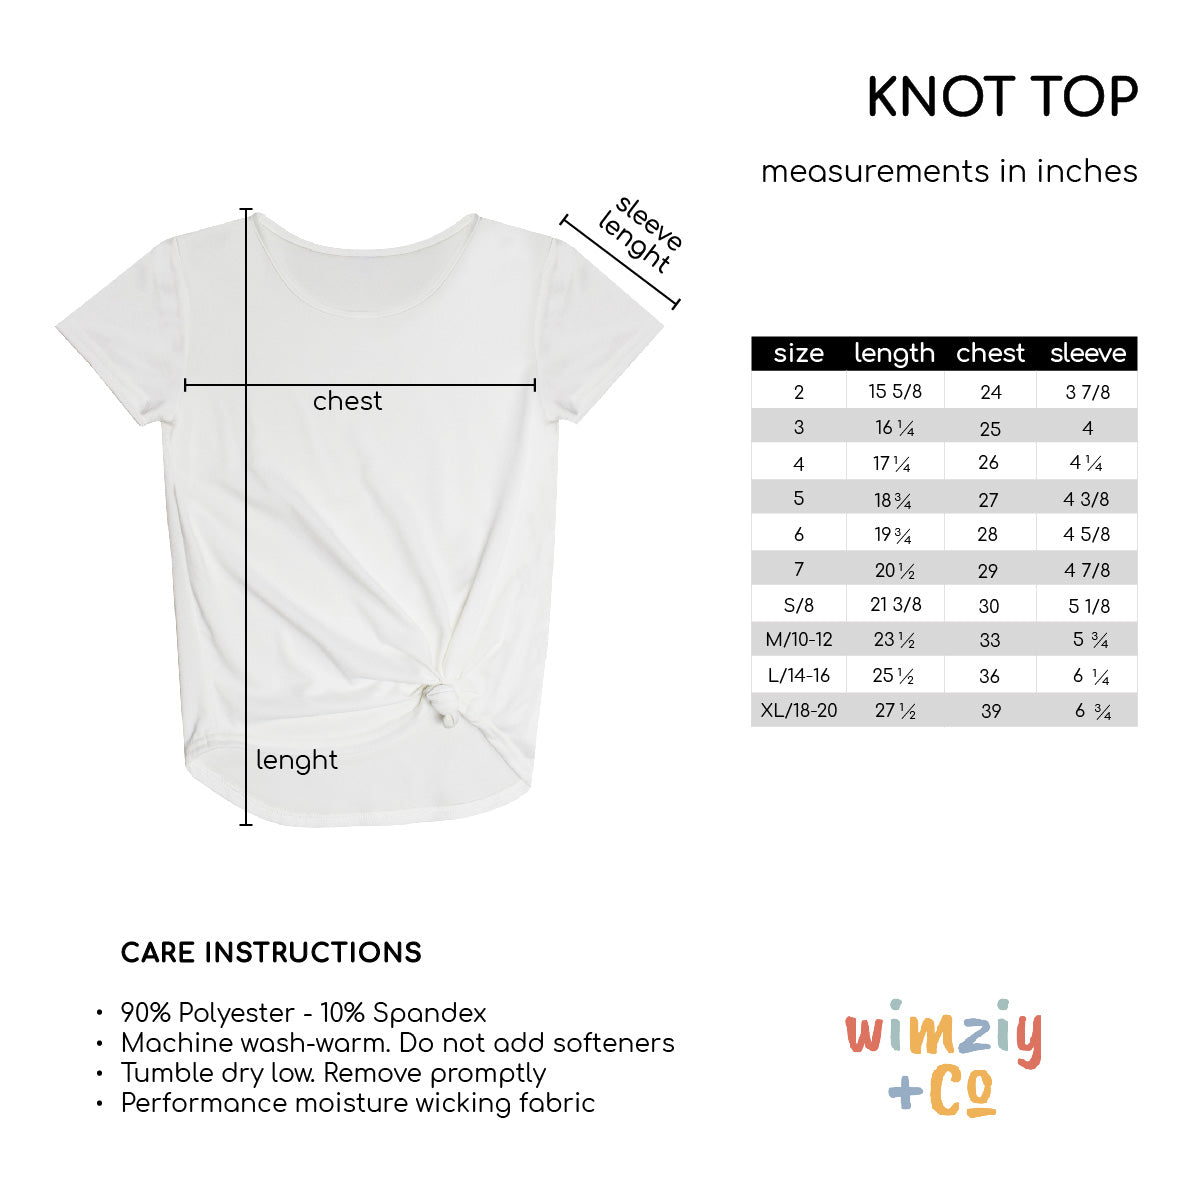 USA White Knot Top - Wimziy&Co.